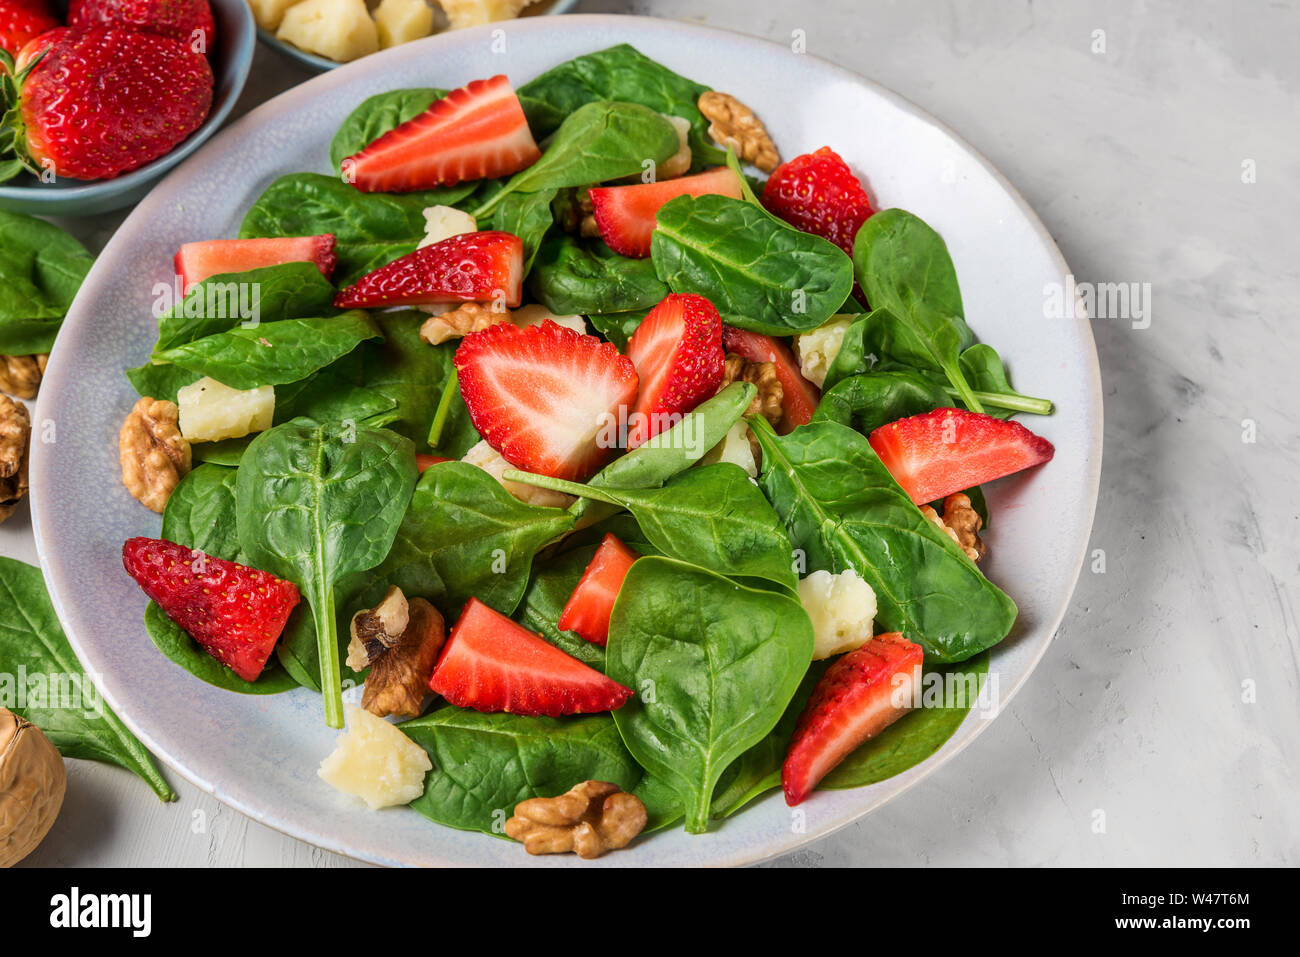 salad with strawberry, spinach leaves, parmesan cheese and walnuts on concrete background. healthy diet food. close up Stock Photo